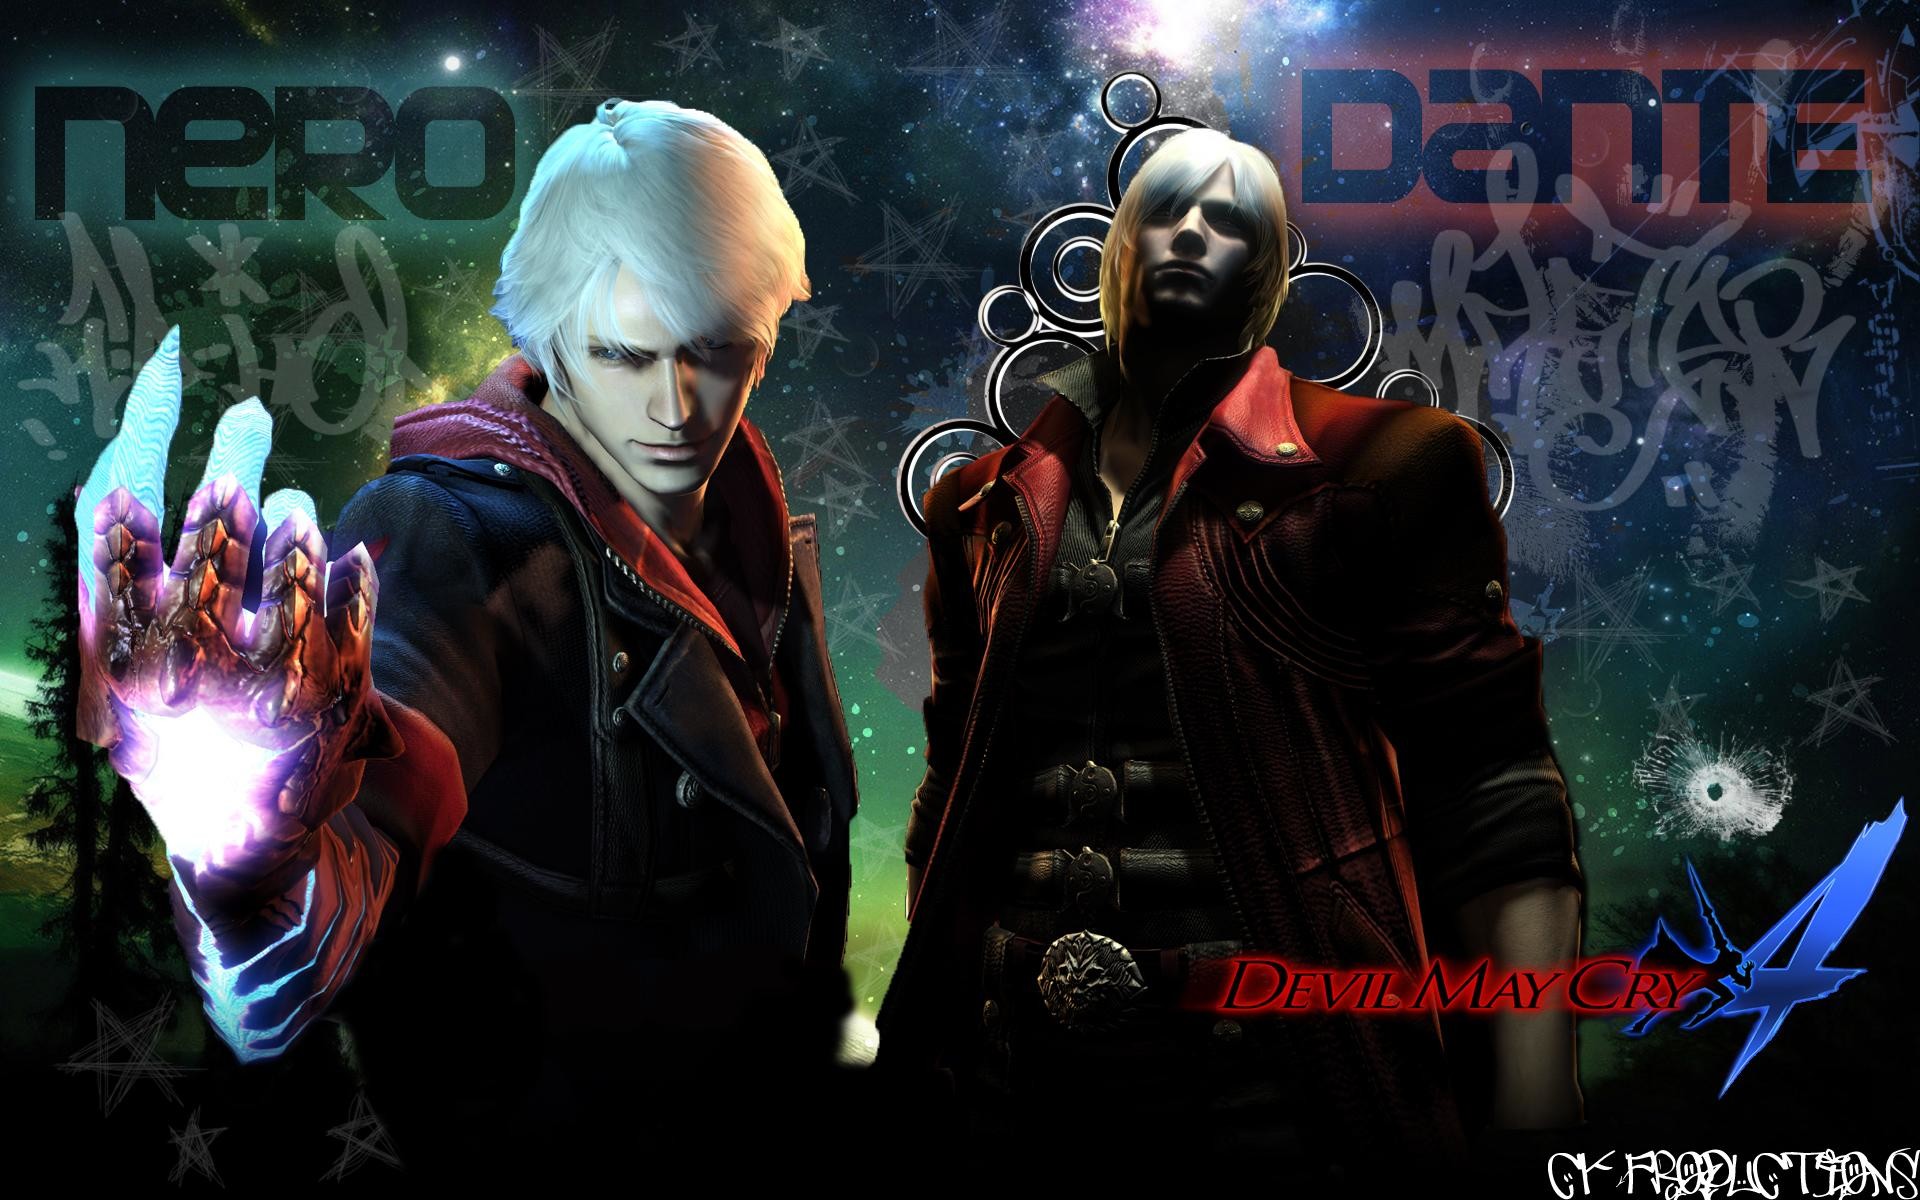 1920x1200 Find out: Devil May Cry 4 wallpaper on http://hdpicorner.com/devil-may-cry-4/  | Desktop Wallpapers | Pinterest | Devil and Wallpaper